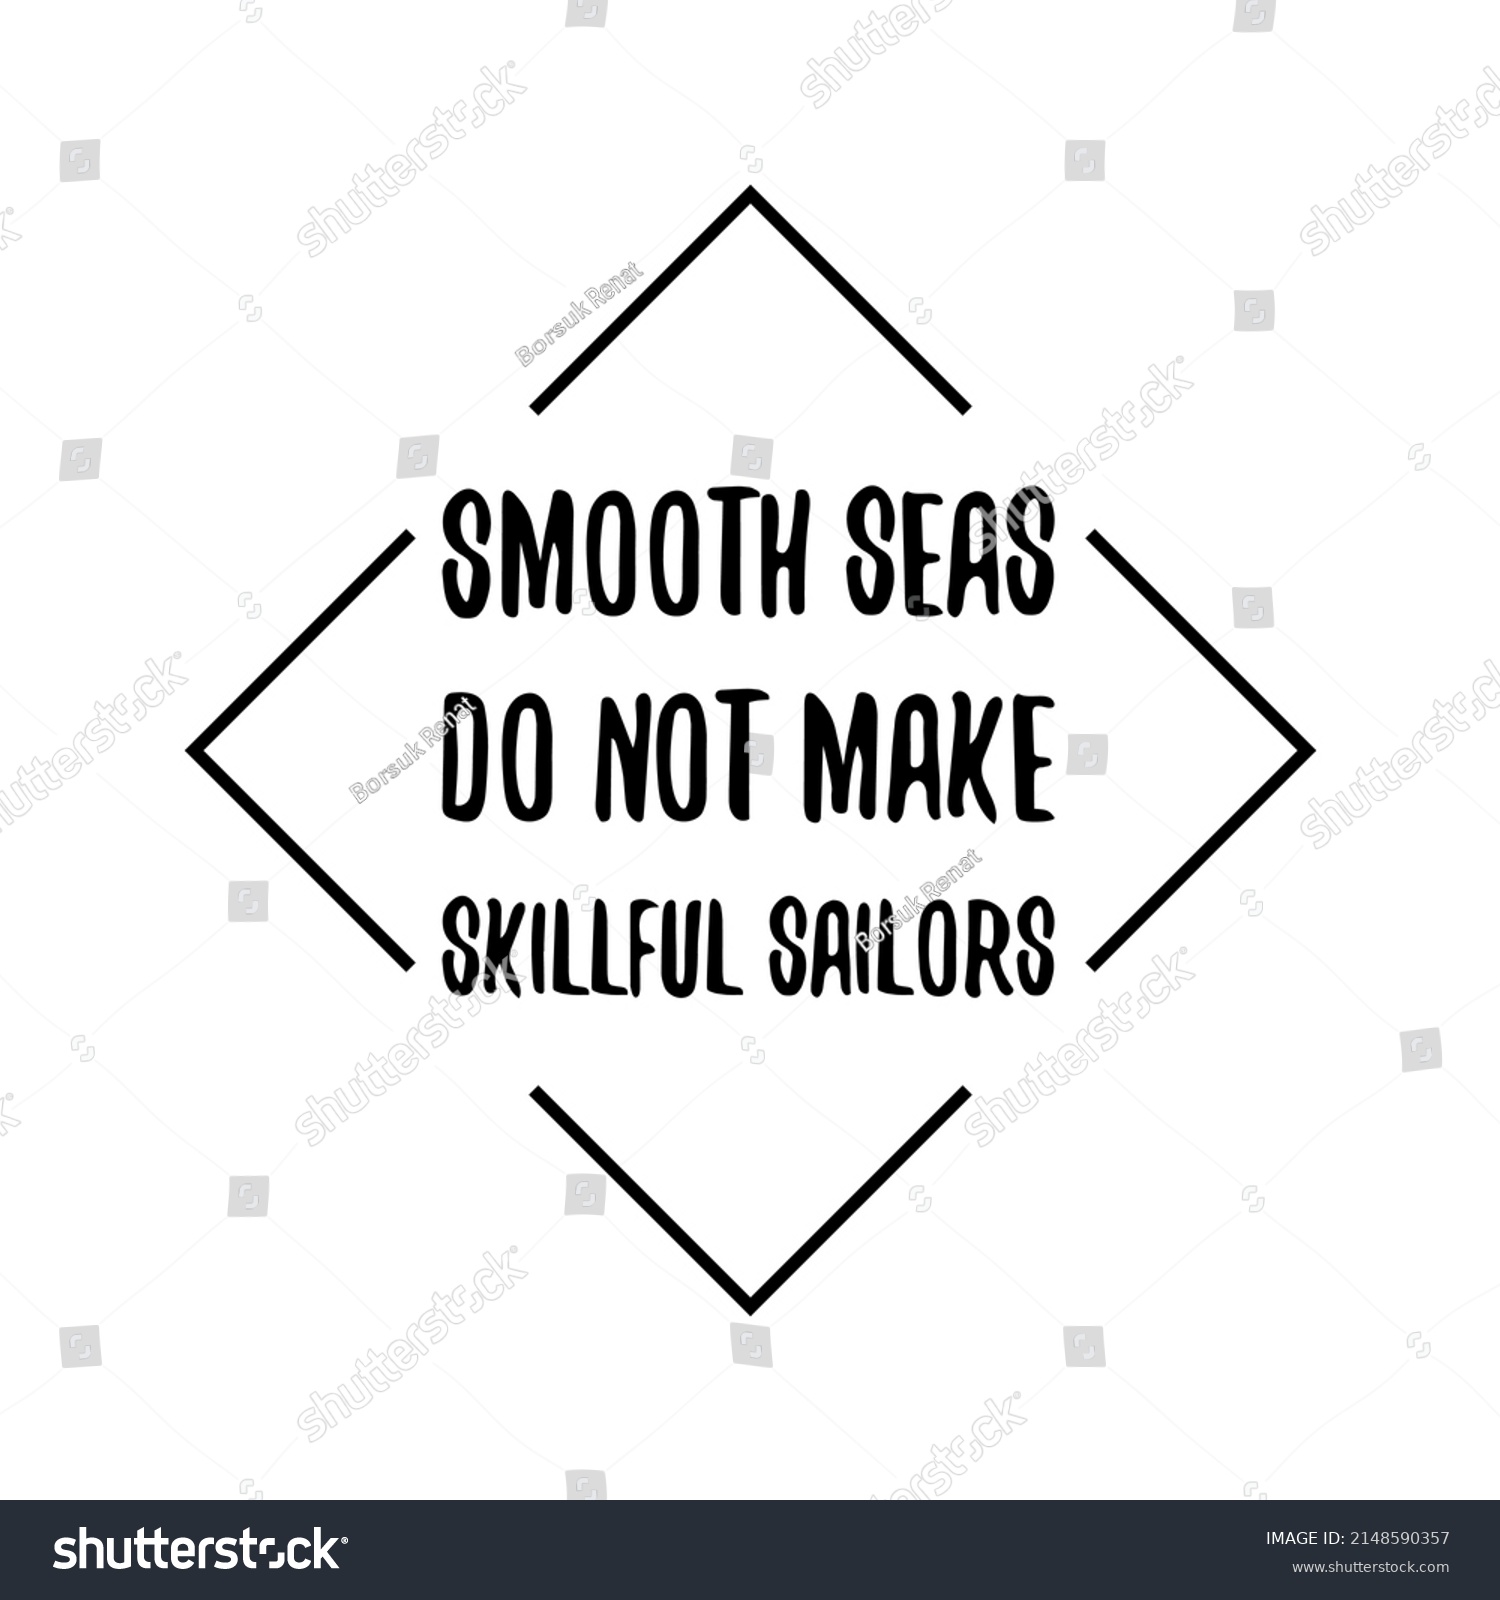 Smooth Seas Do Not Make Skillful Stock Vector Royalty Free 2148590357 Shutterstock 7817